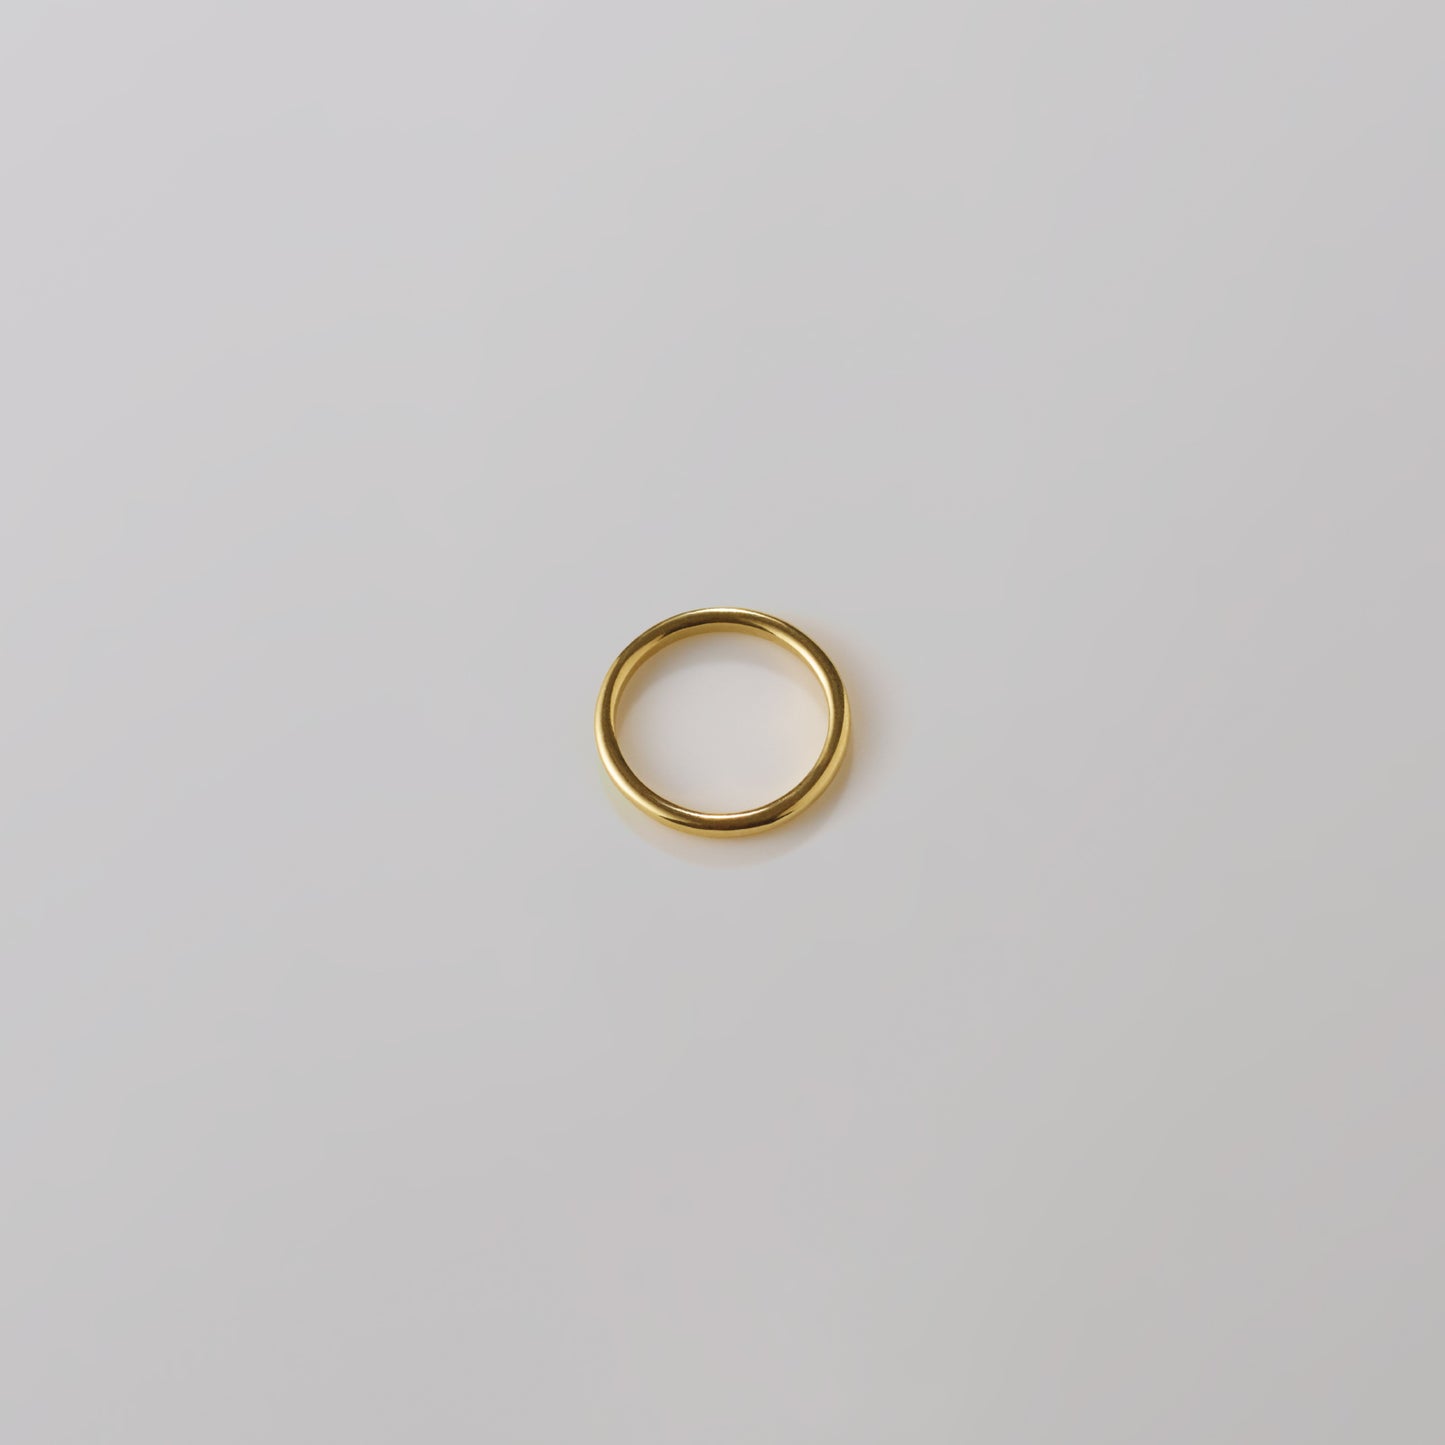 verusマタニティジュエリーセット ゴールド（Babyring Gold × Necklace Gold）